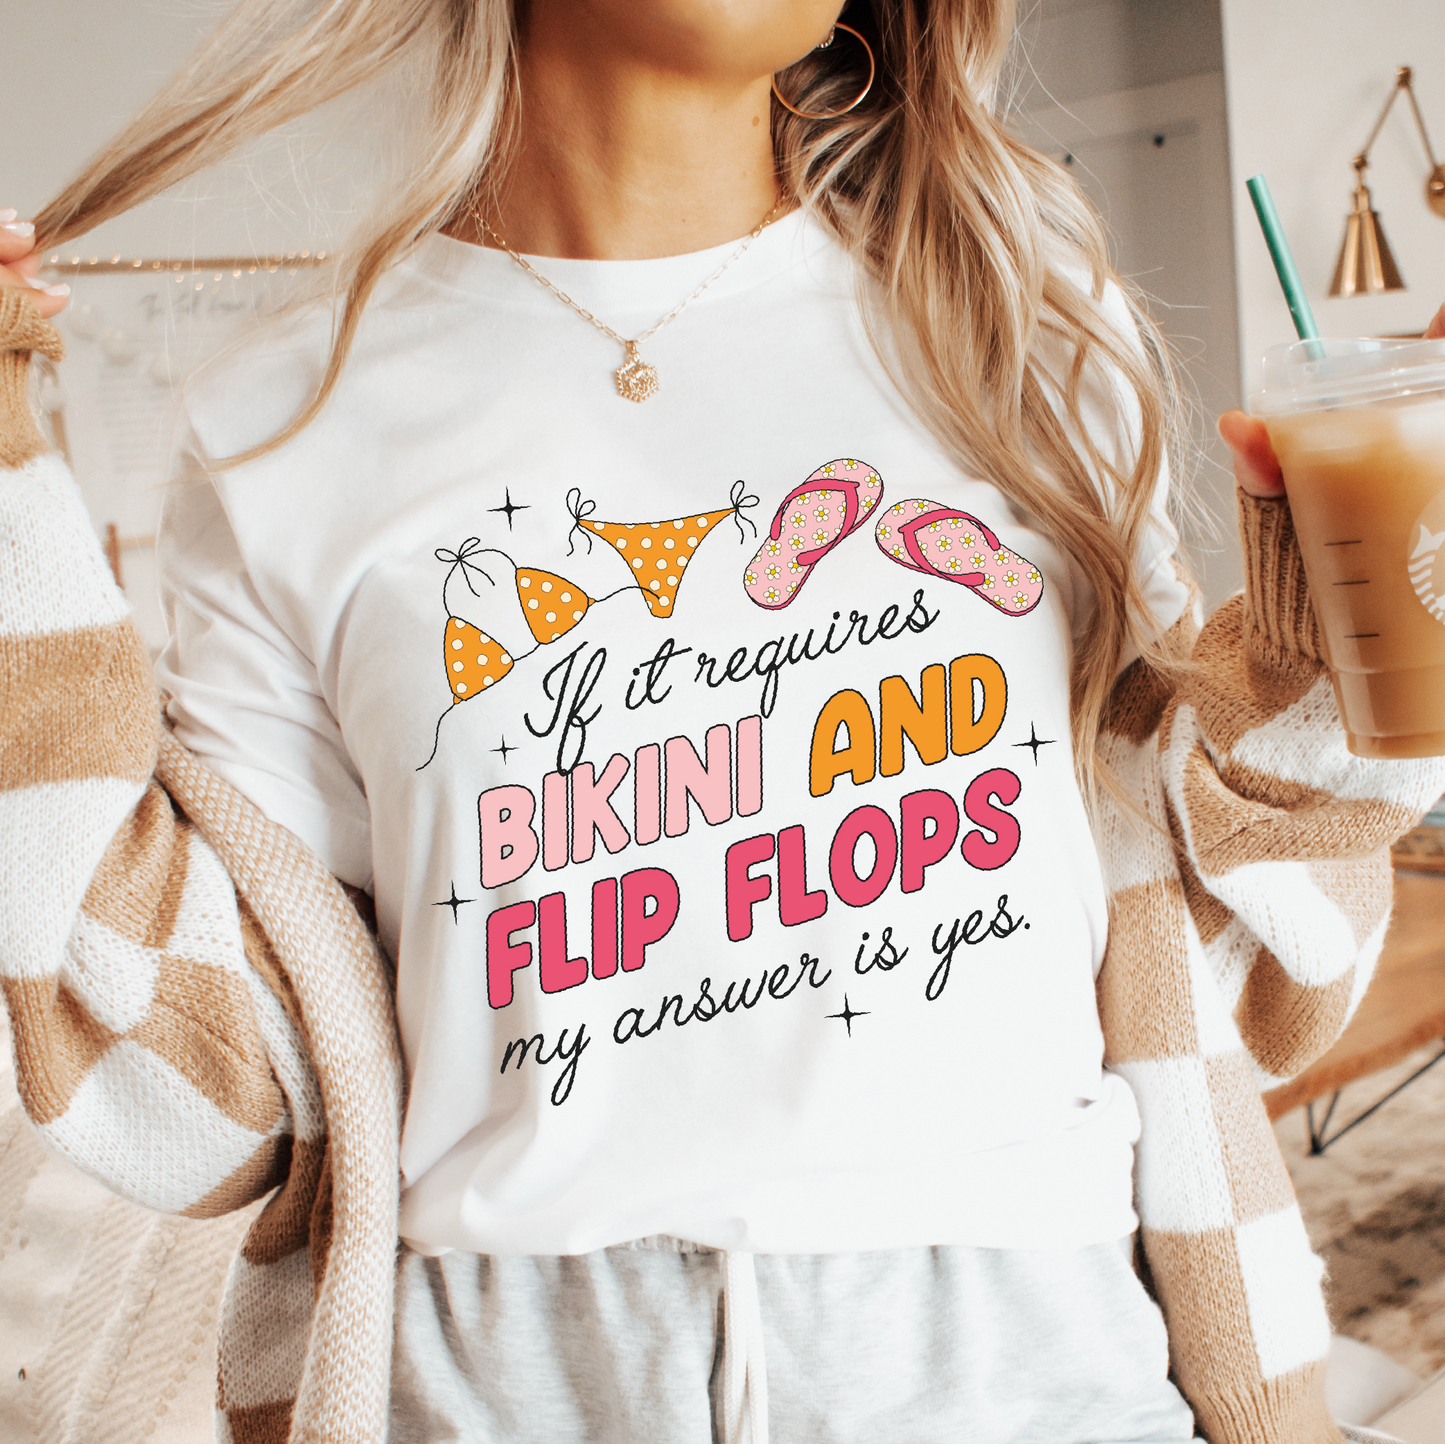 If it Requires Bikini and Flip Flops PNG SVG | Summer Sublimation | Trendy Tshirt Design